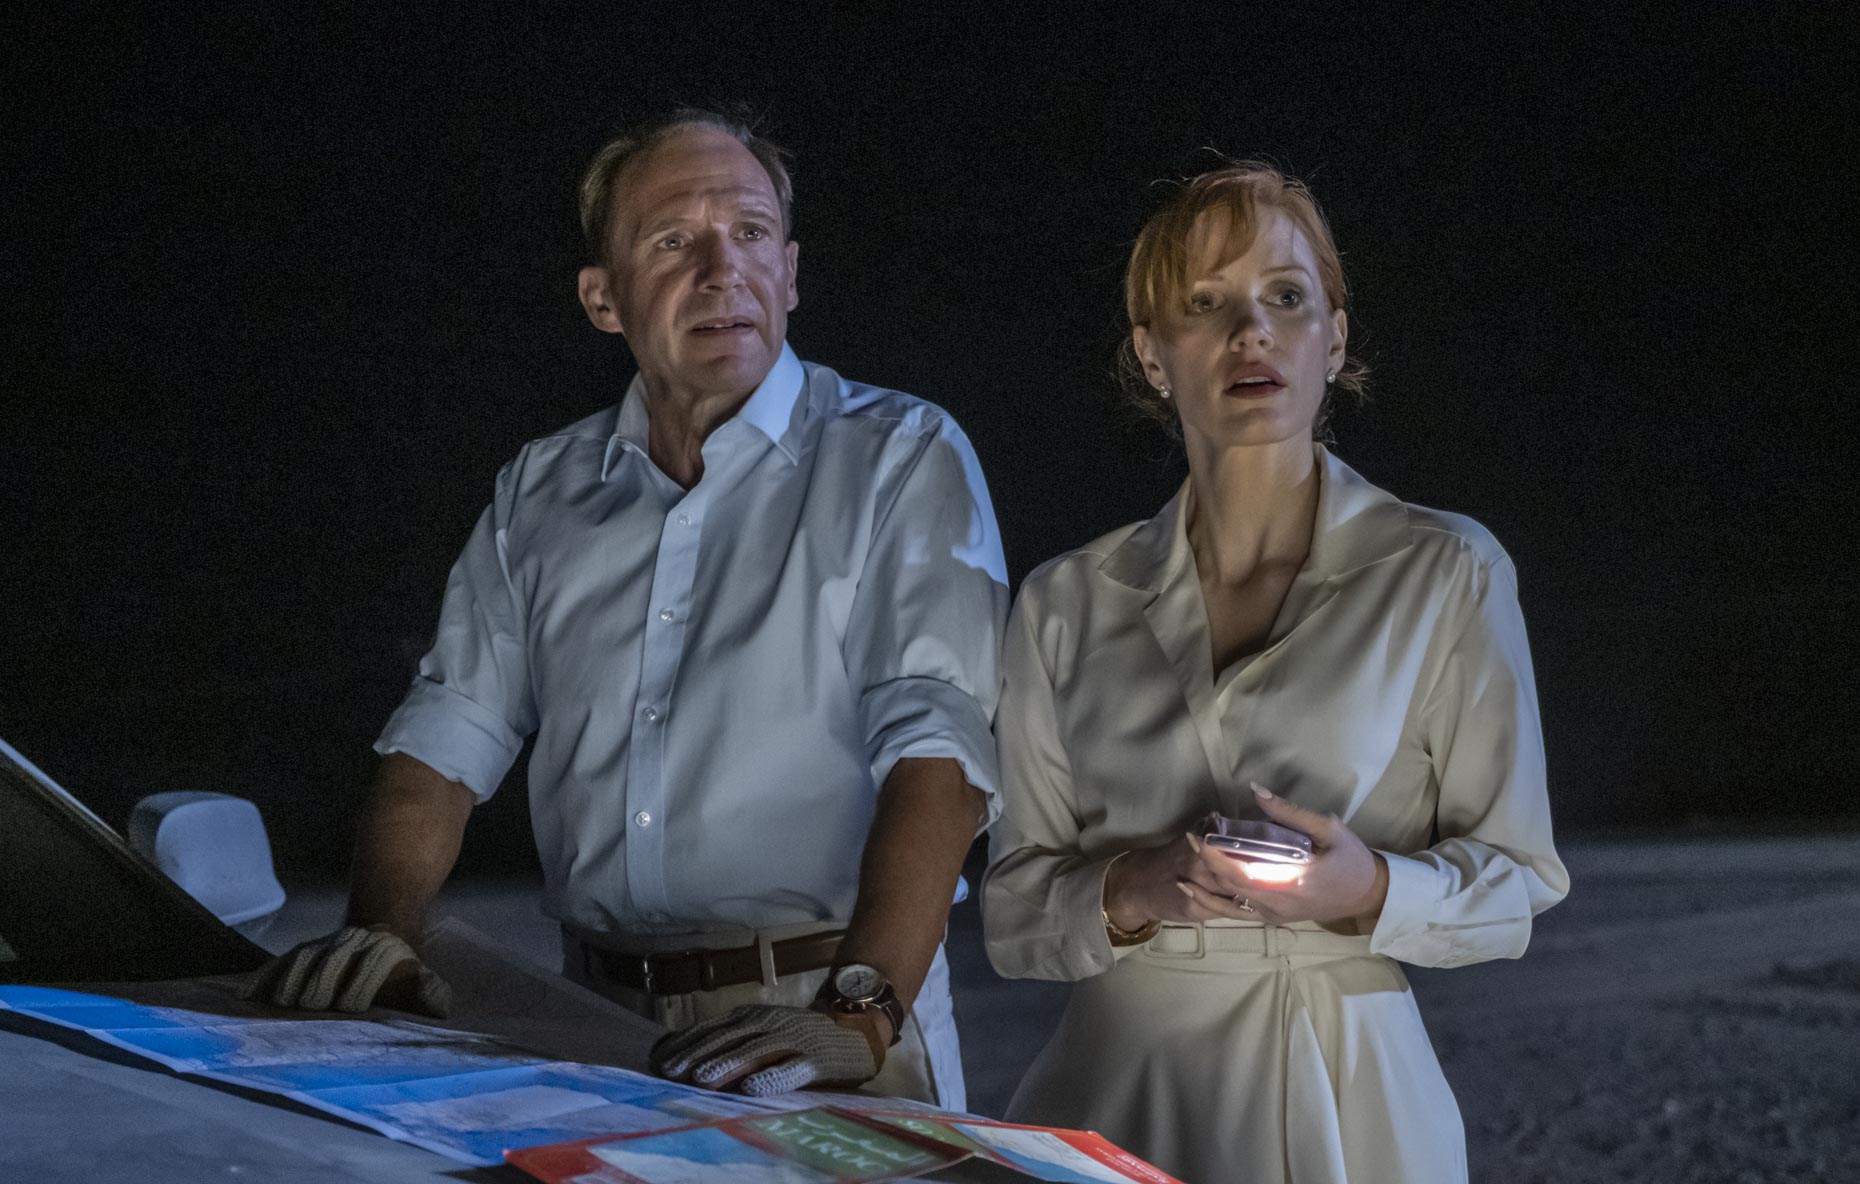 Jessica Chastain And Ralph Fiennes Talk Provocation And Acidic Humor In The Forgiven [Exclusive]